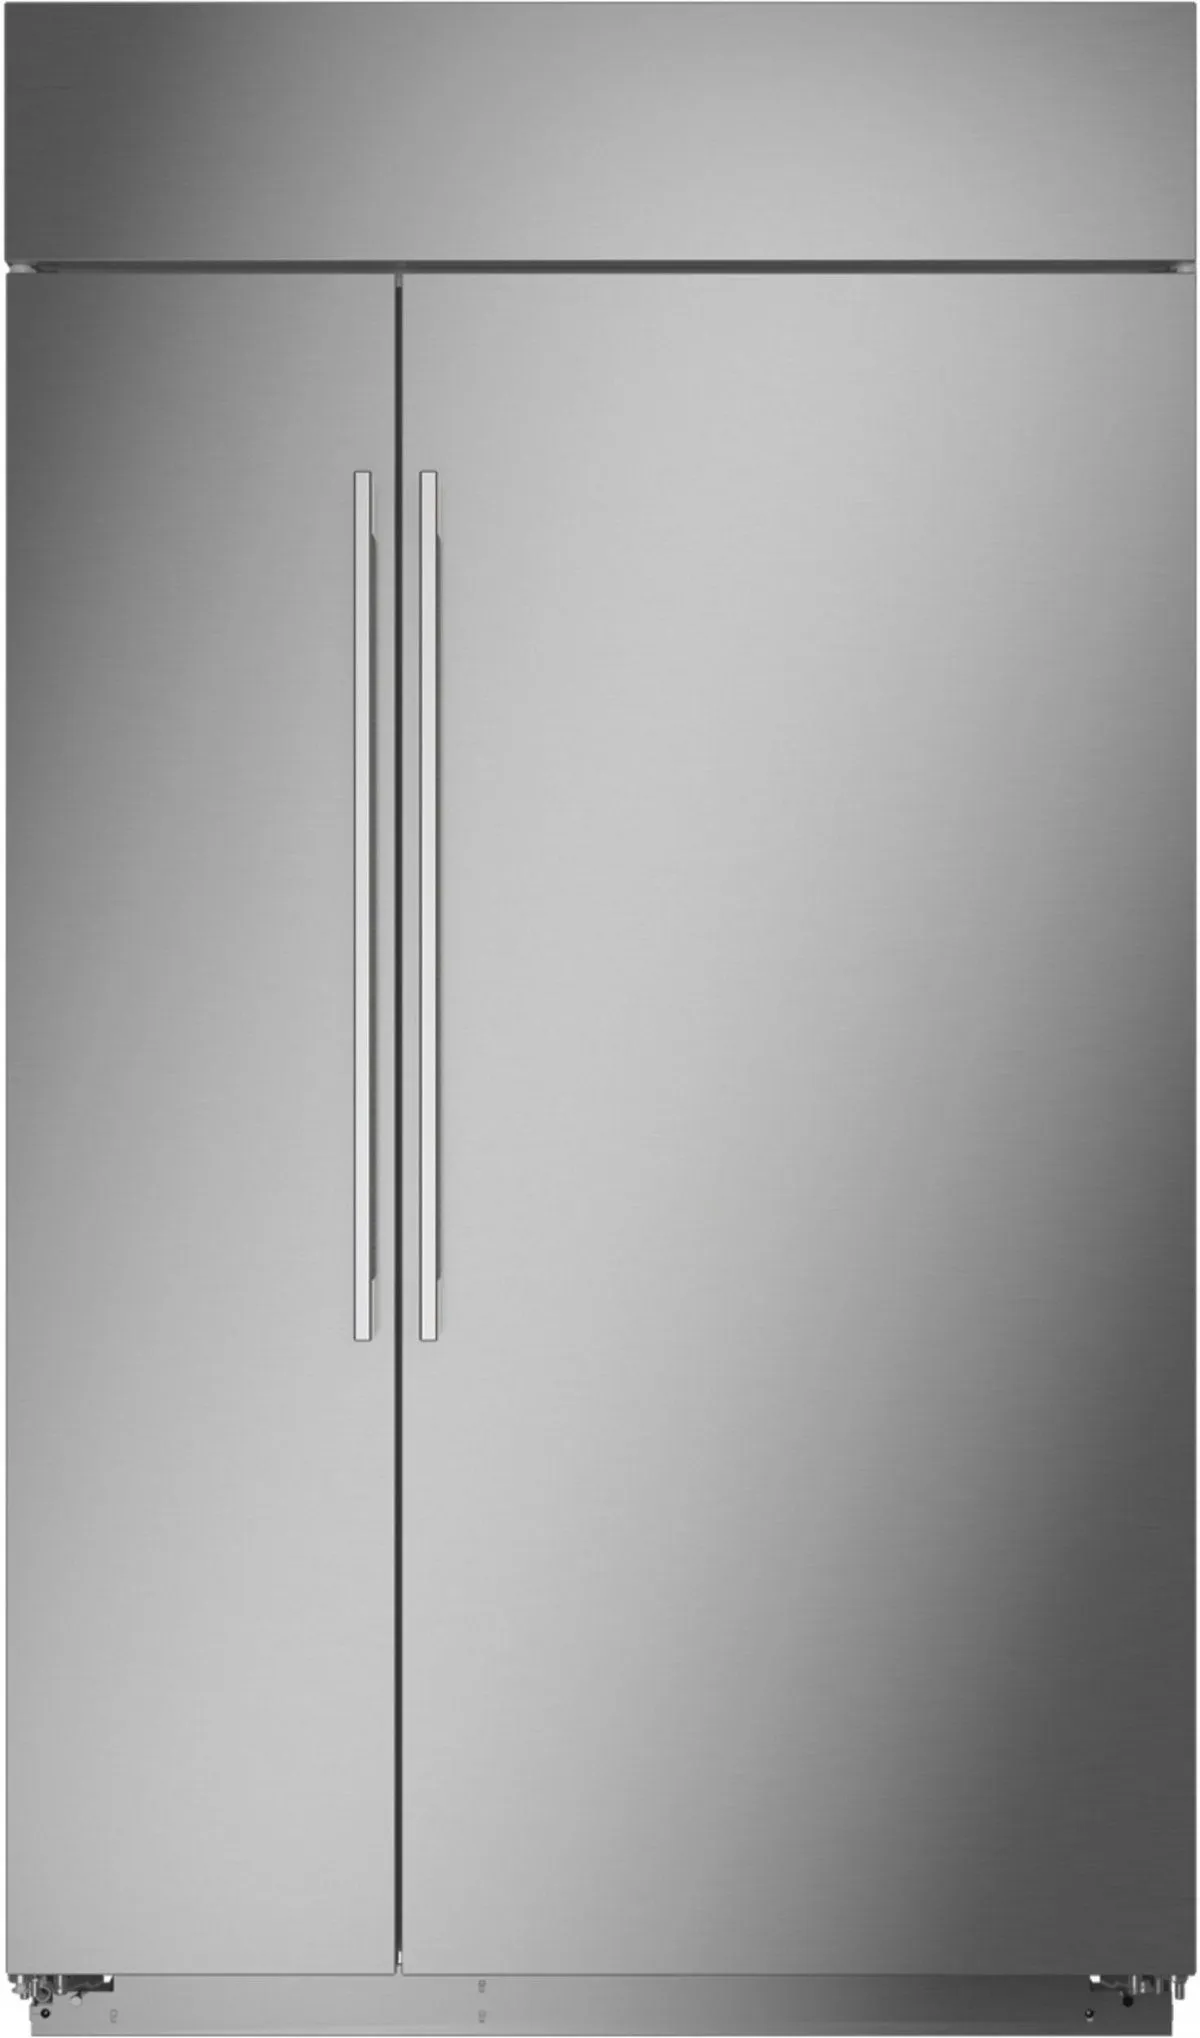 Front view of Monogram ZISS480NNSS 48” built in side by side refrigerator 